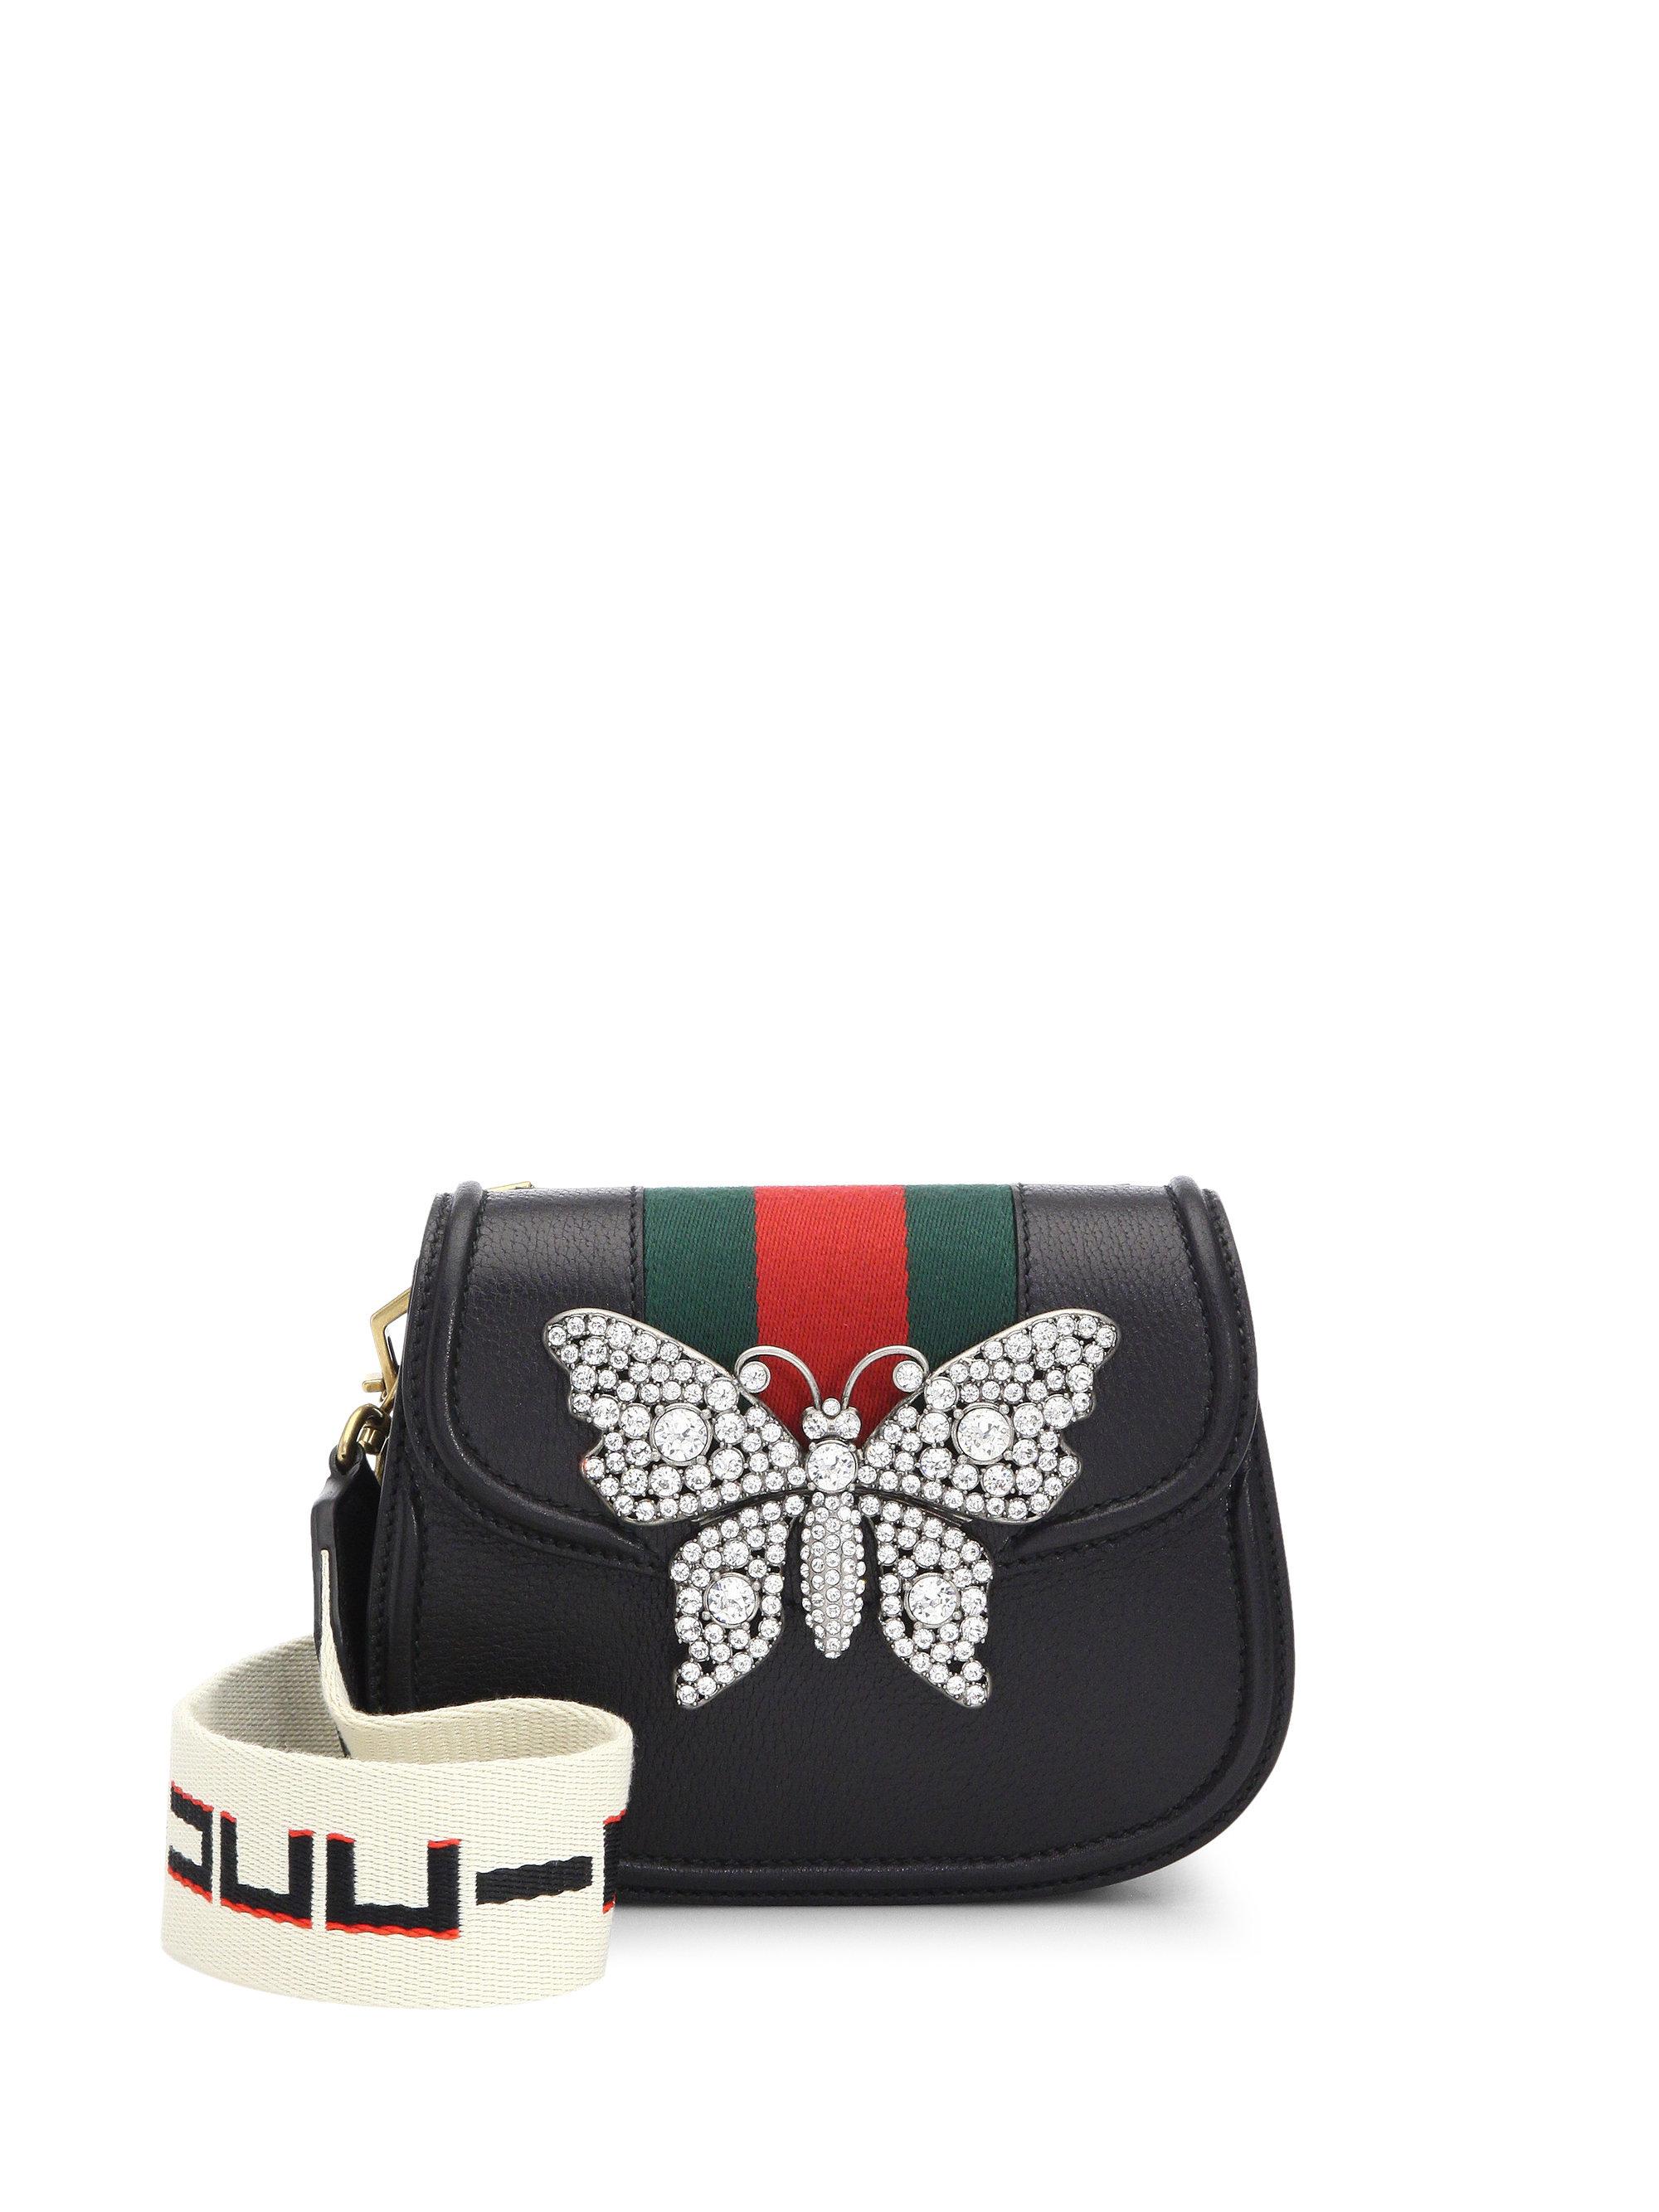 Gucci Leather Butterfly Mini Bag in Black - Lyst